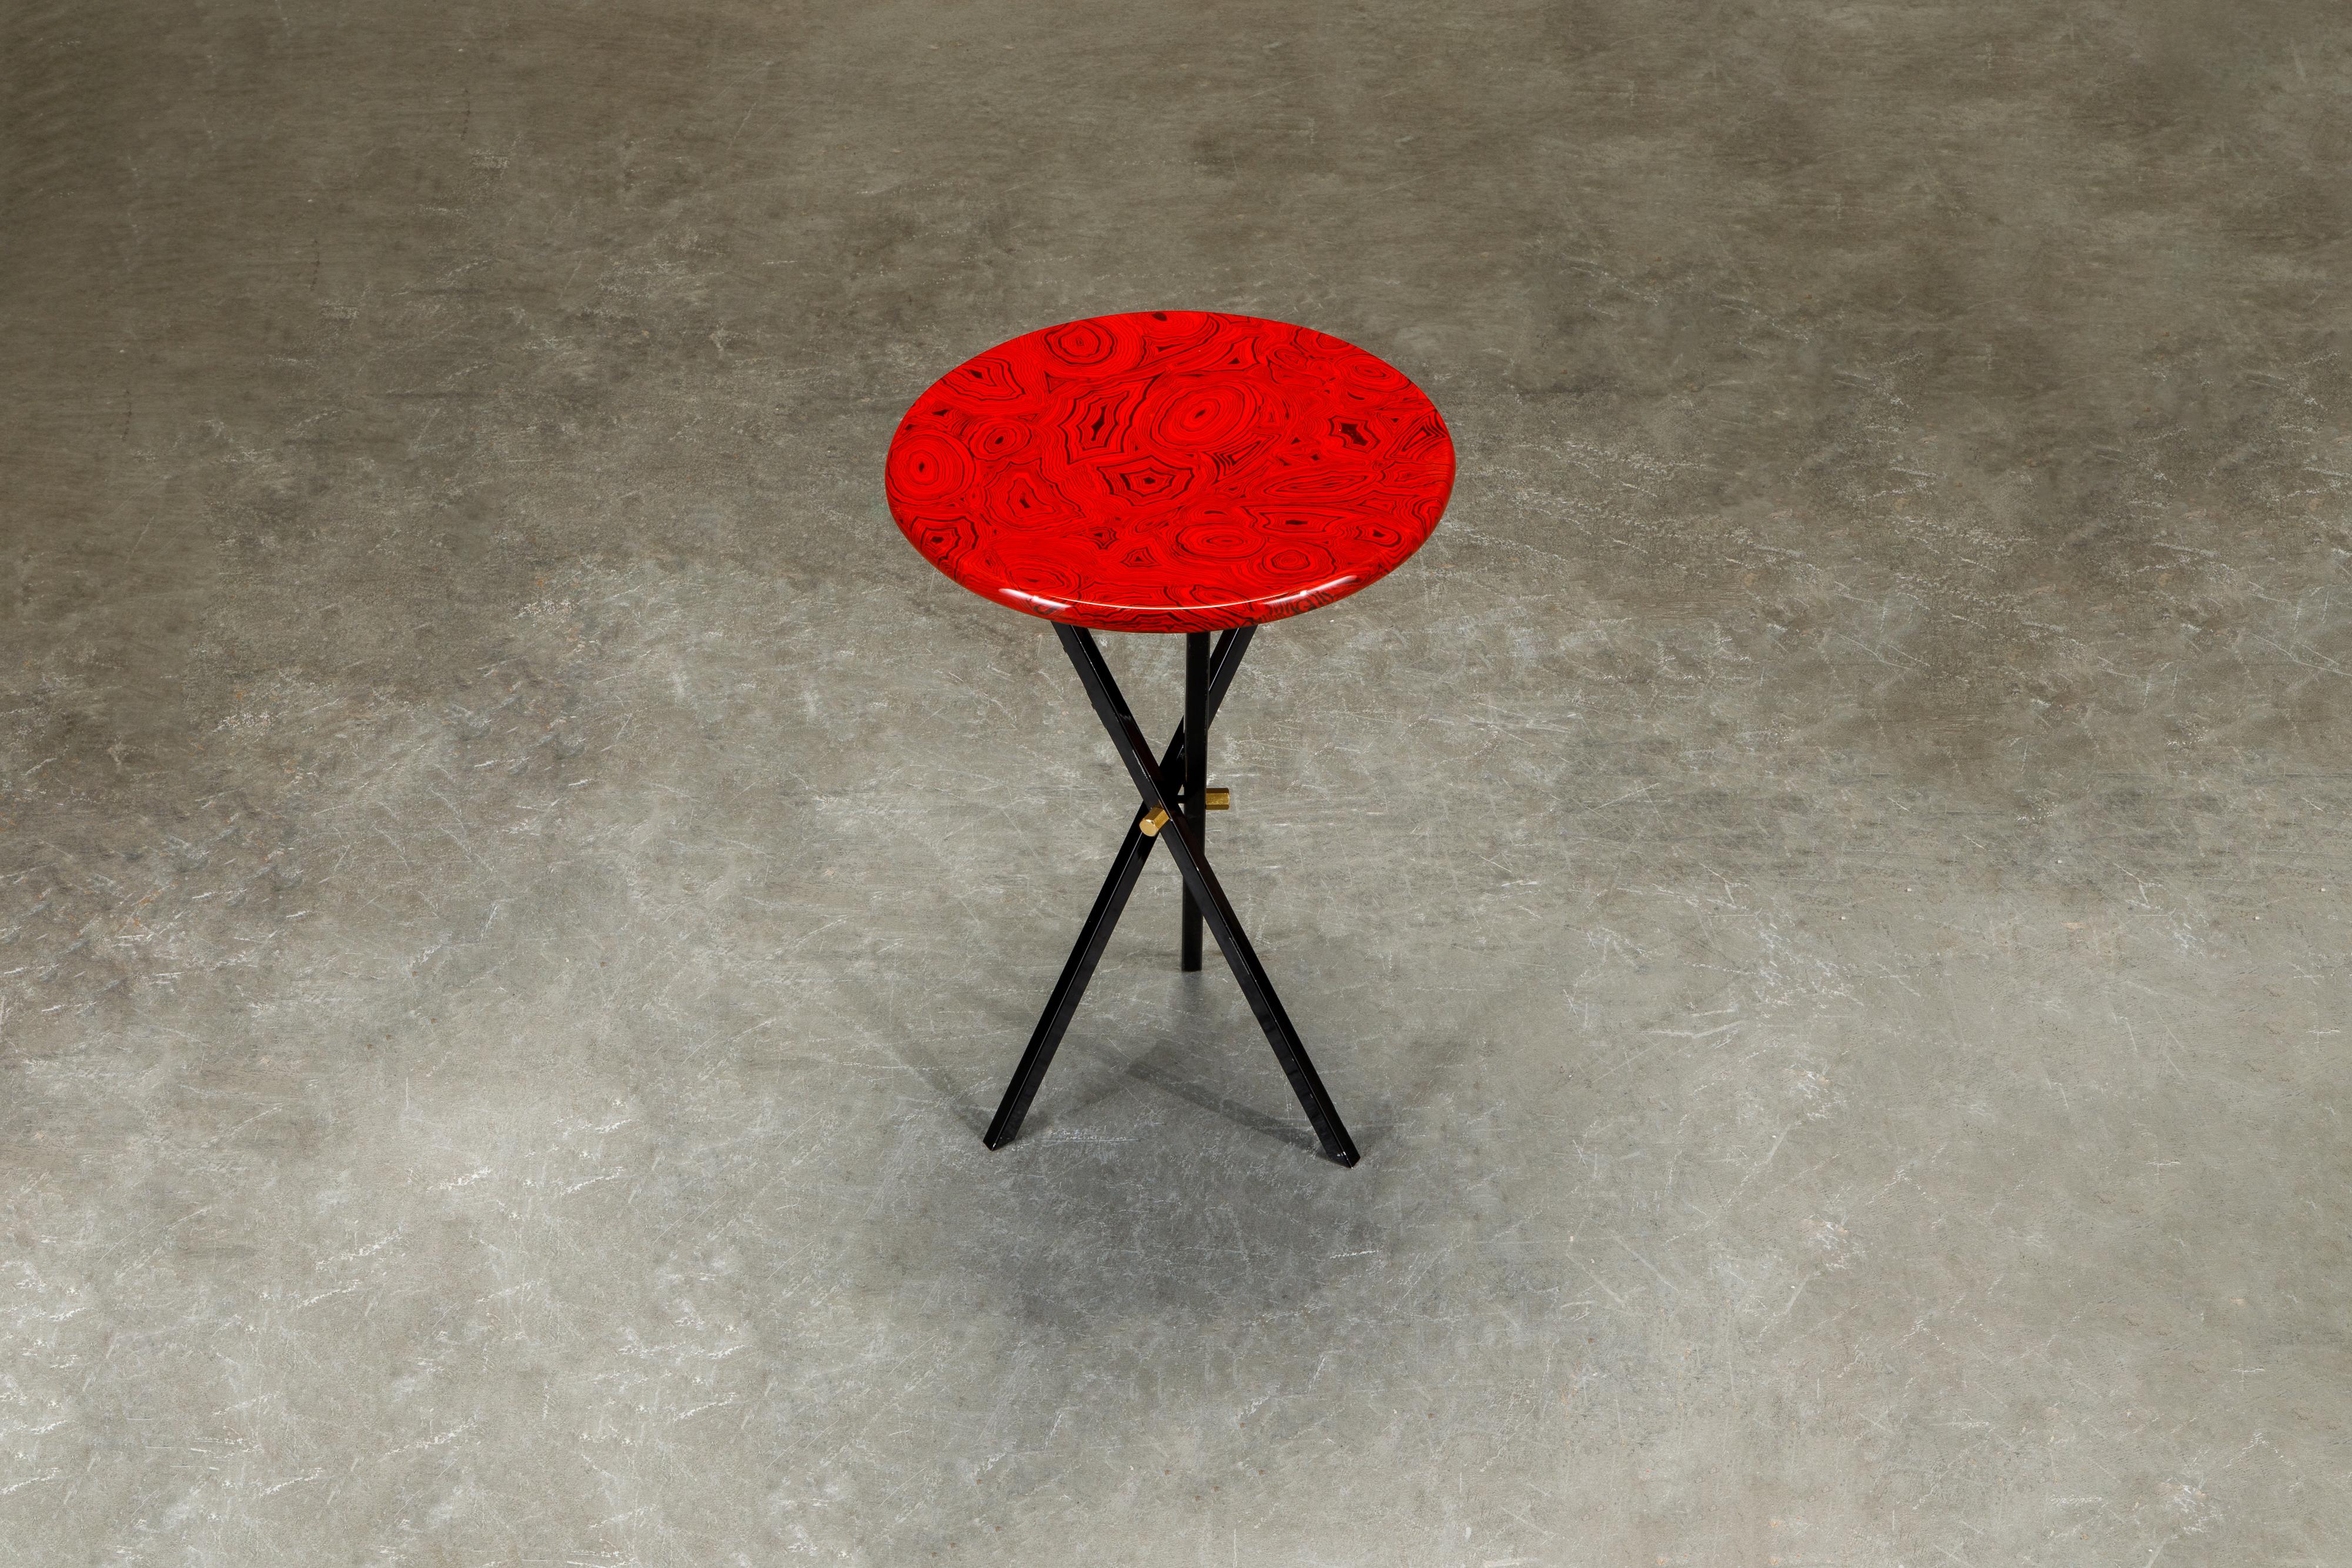 This gorgeous collectors item is a 'Red Malachite' side table by Piero Fornasetti, signed underneath with its original label. The side table is made with lacquered wood that has a malachite motif in red and is affixed on top of a black painted brass